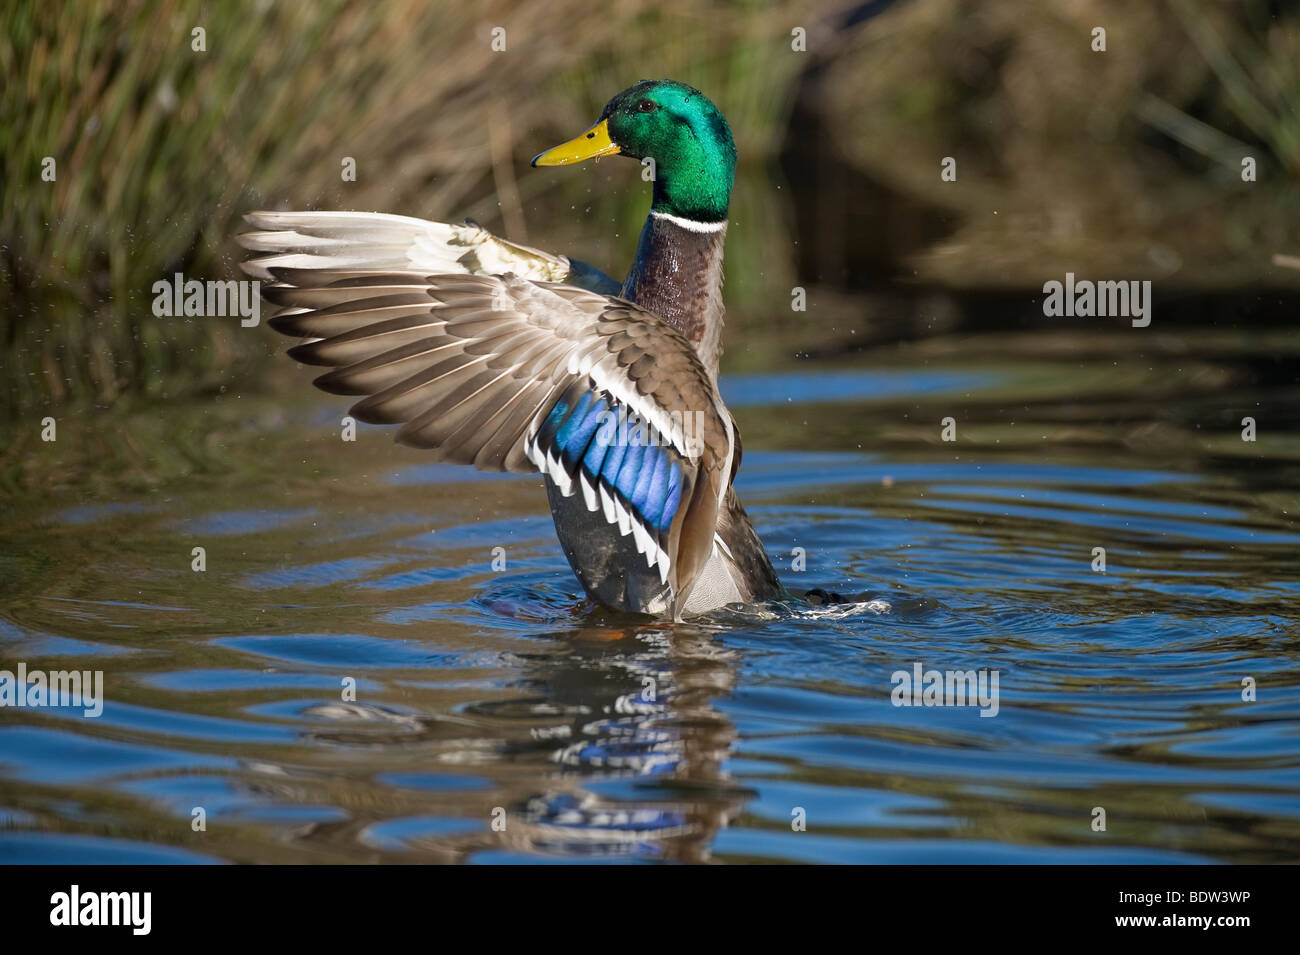 A duck spreading its wings Stock Photo